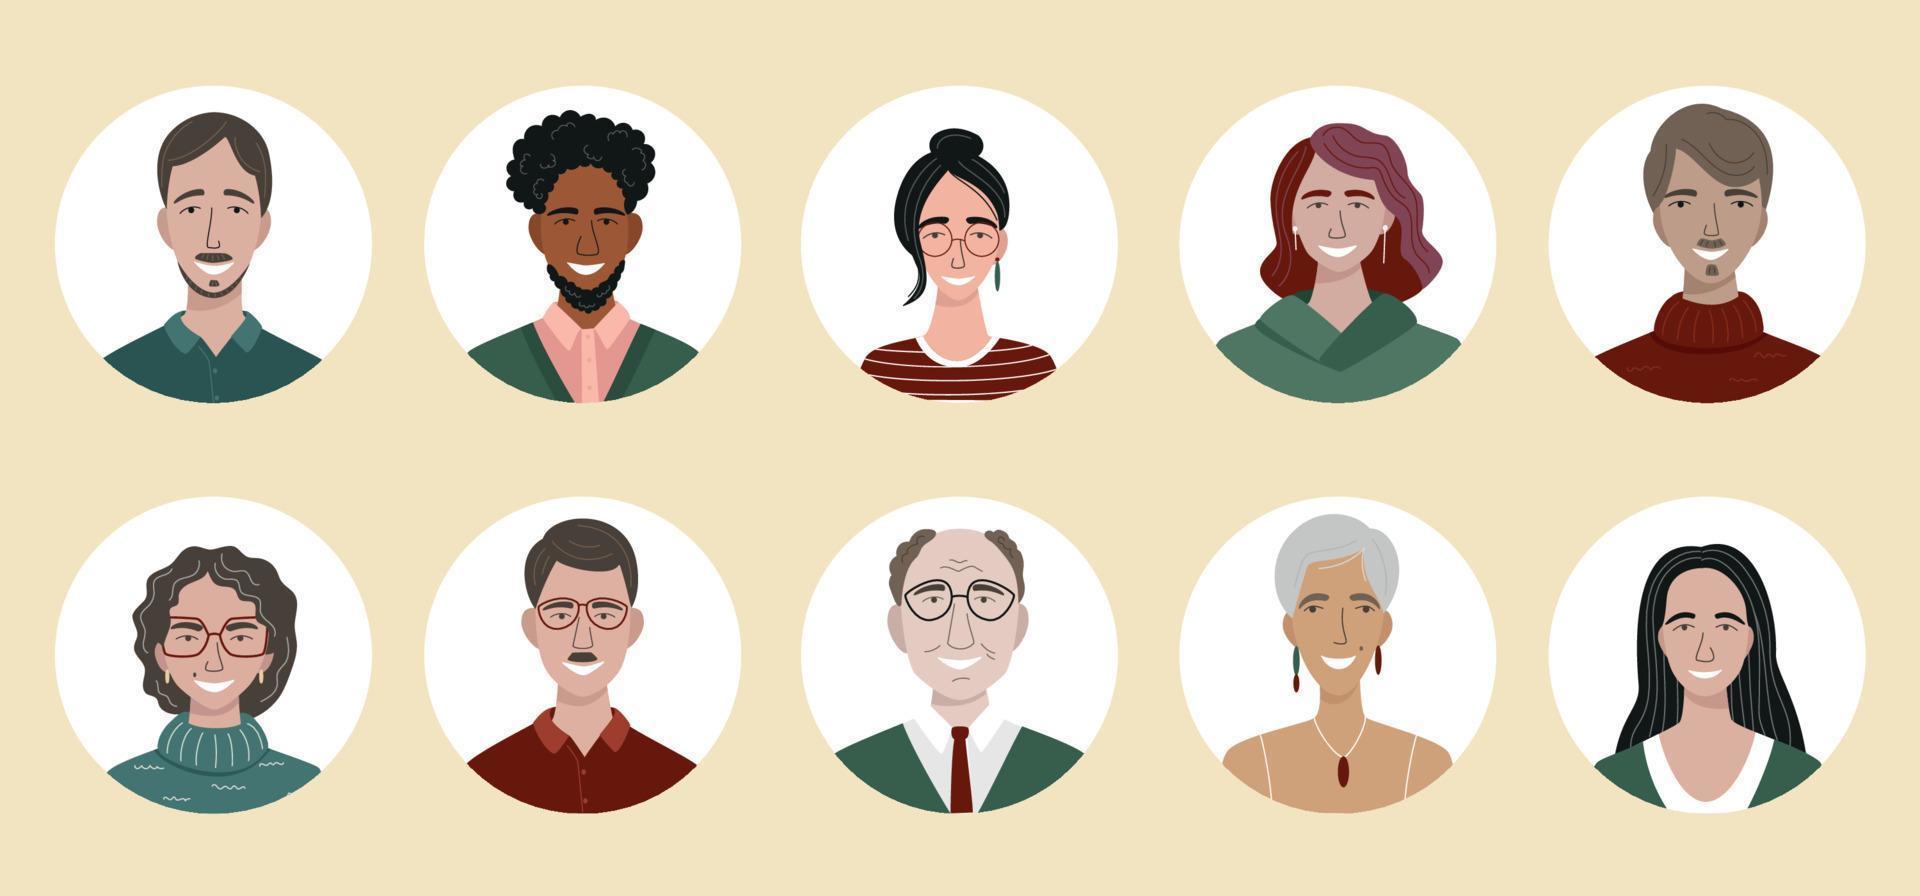 Bundle of different people avatars. Set of colourful user portraits. vector